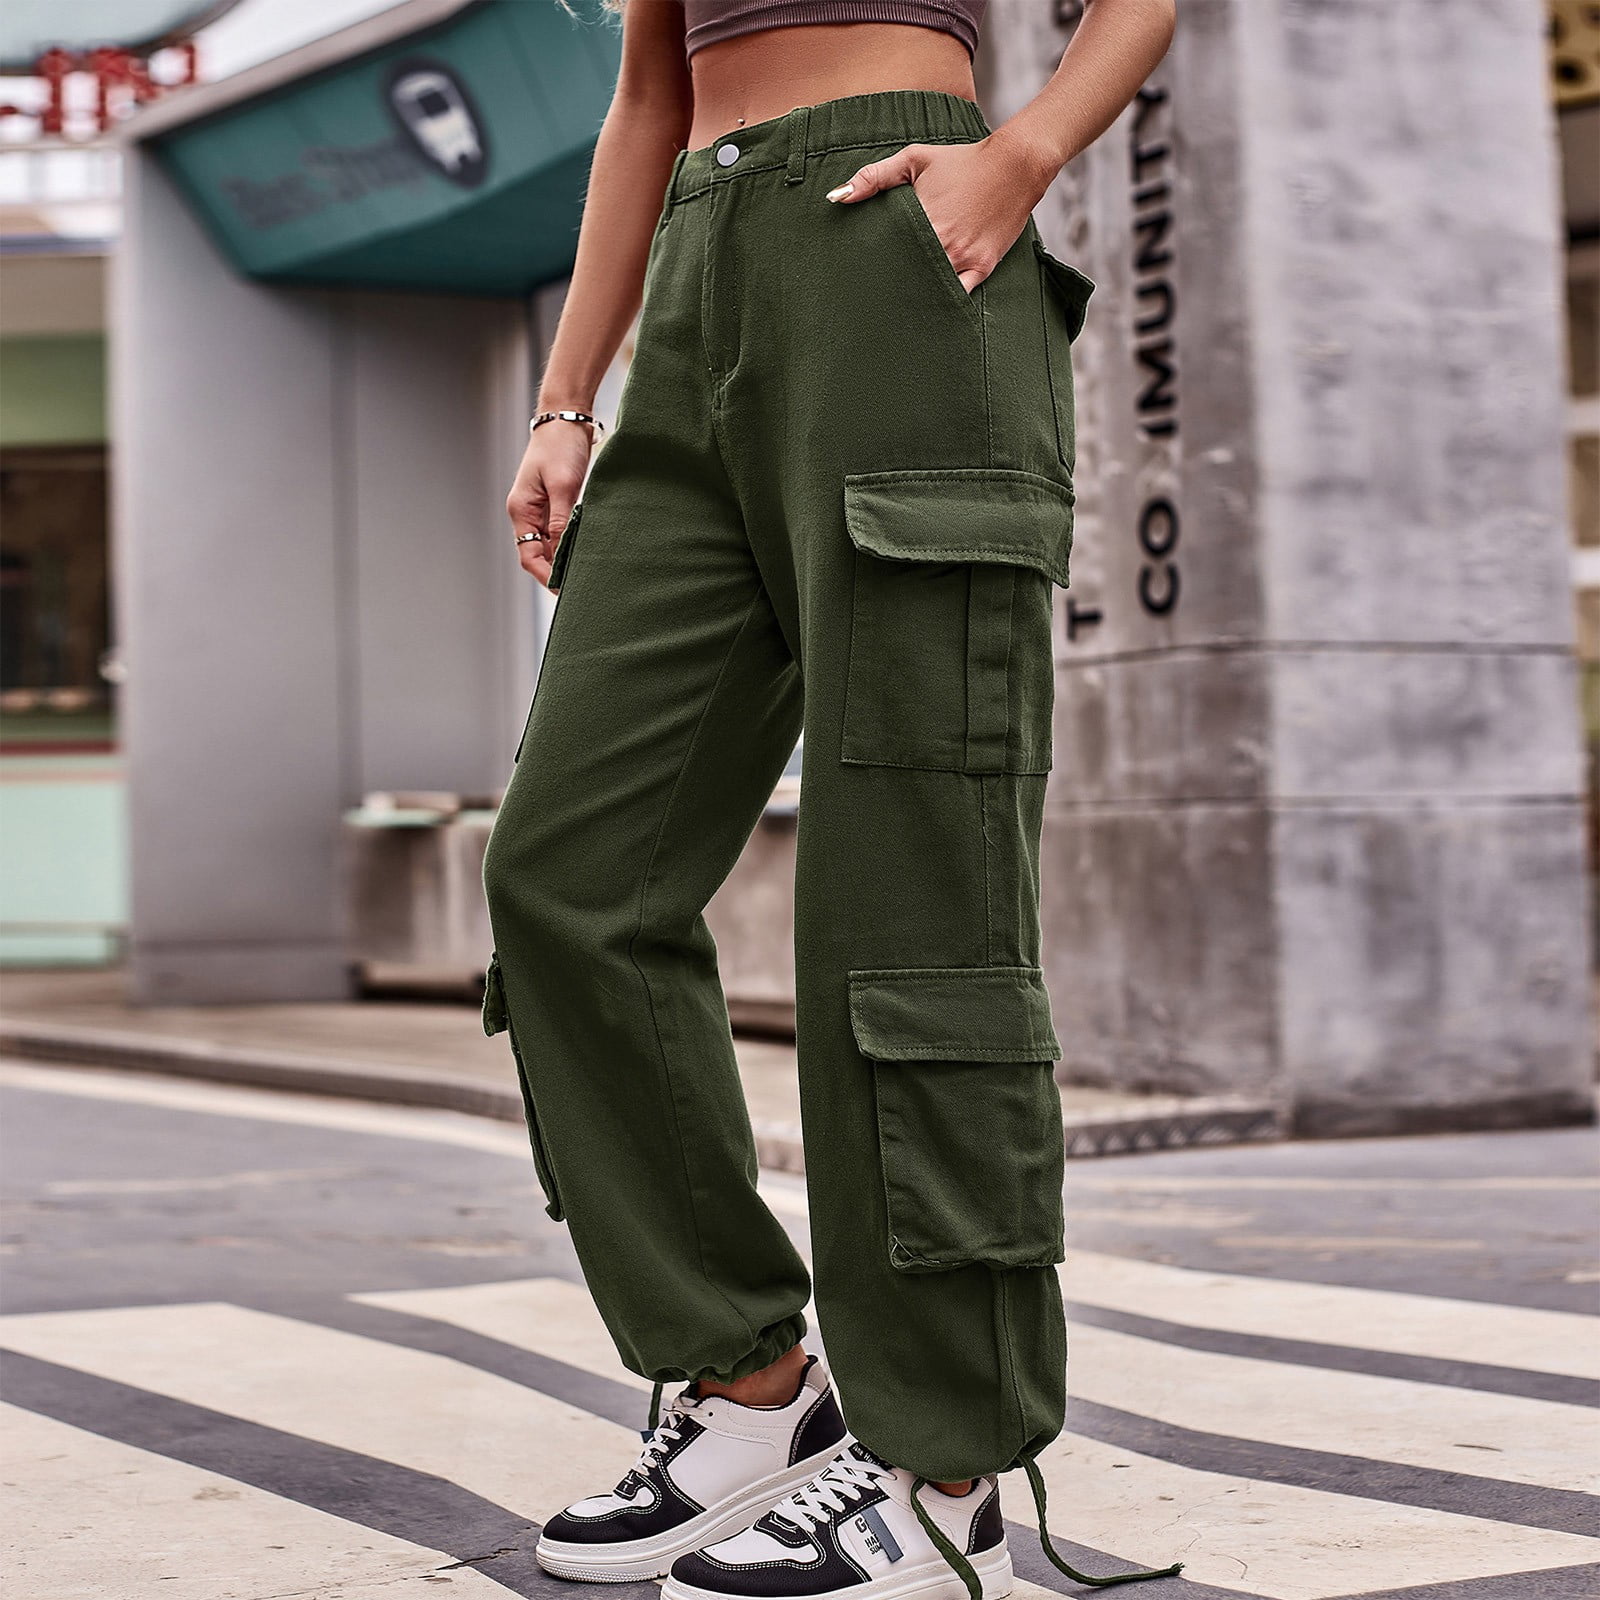 COZYEASE Women's Elastic High Waisted Wide Leg Cargo Pants Casual Outdoor  Trousers with Pockets Army Green Solid XS at Amazon Women's Clothing store